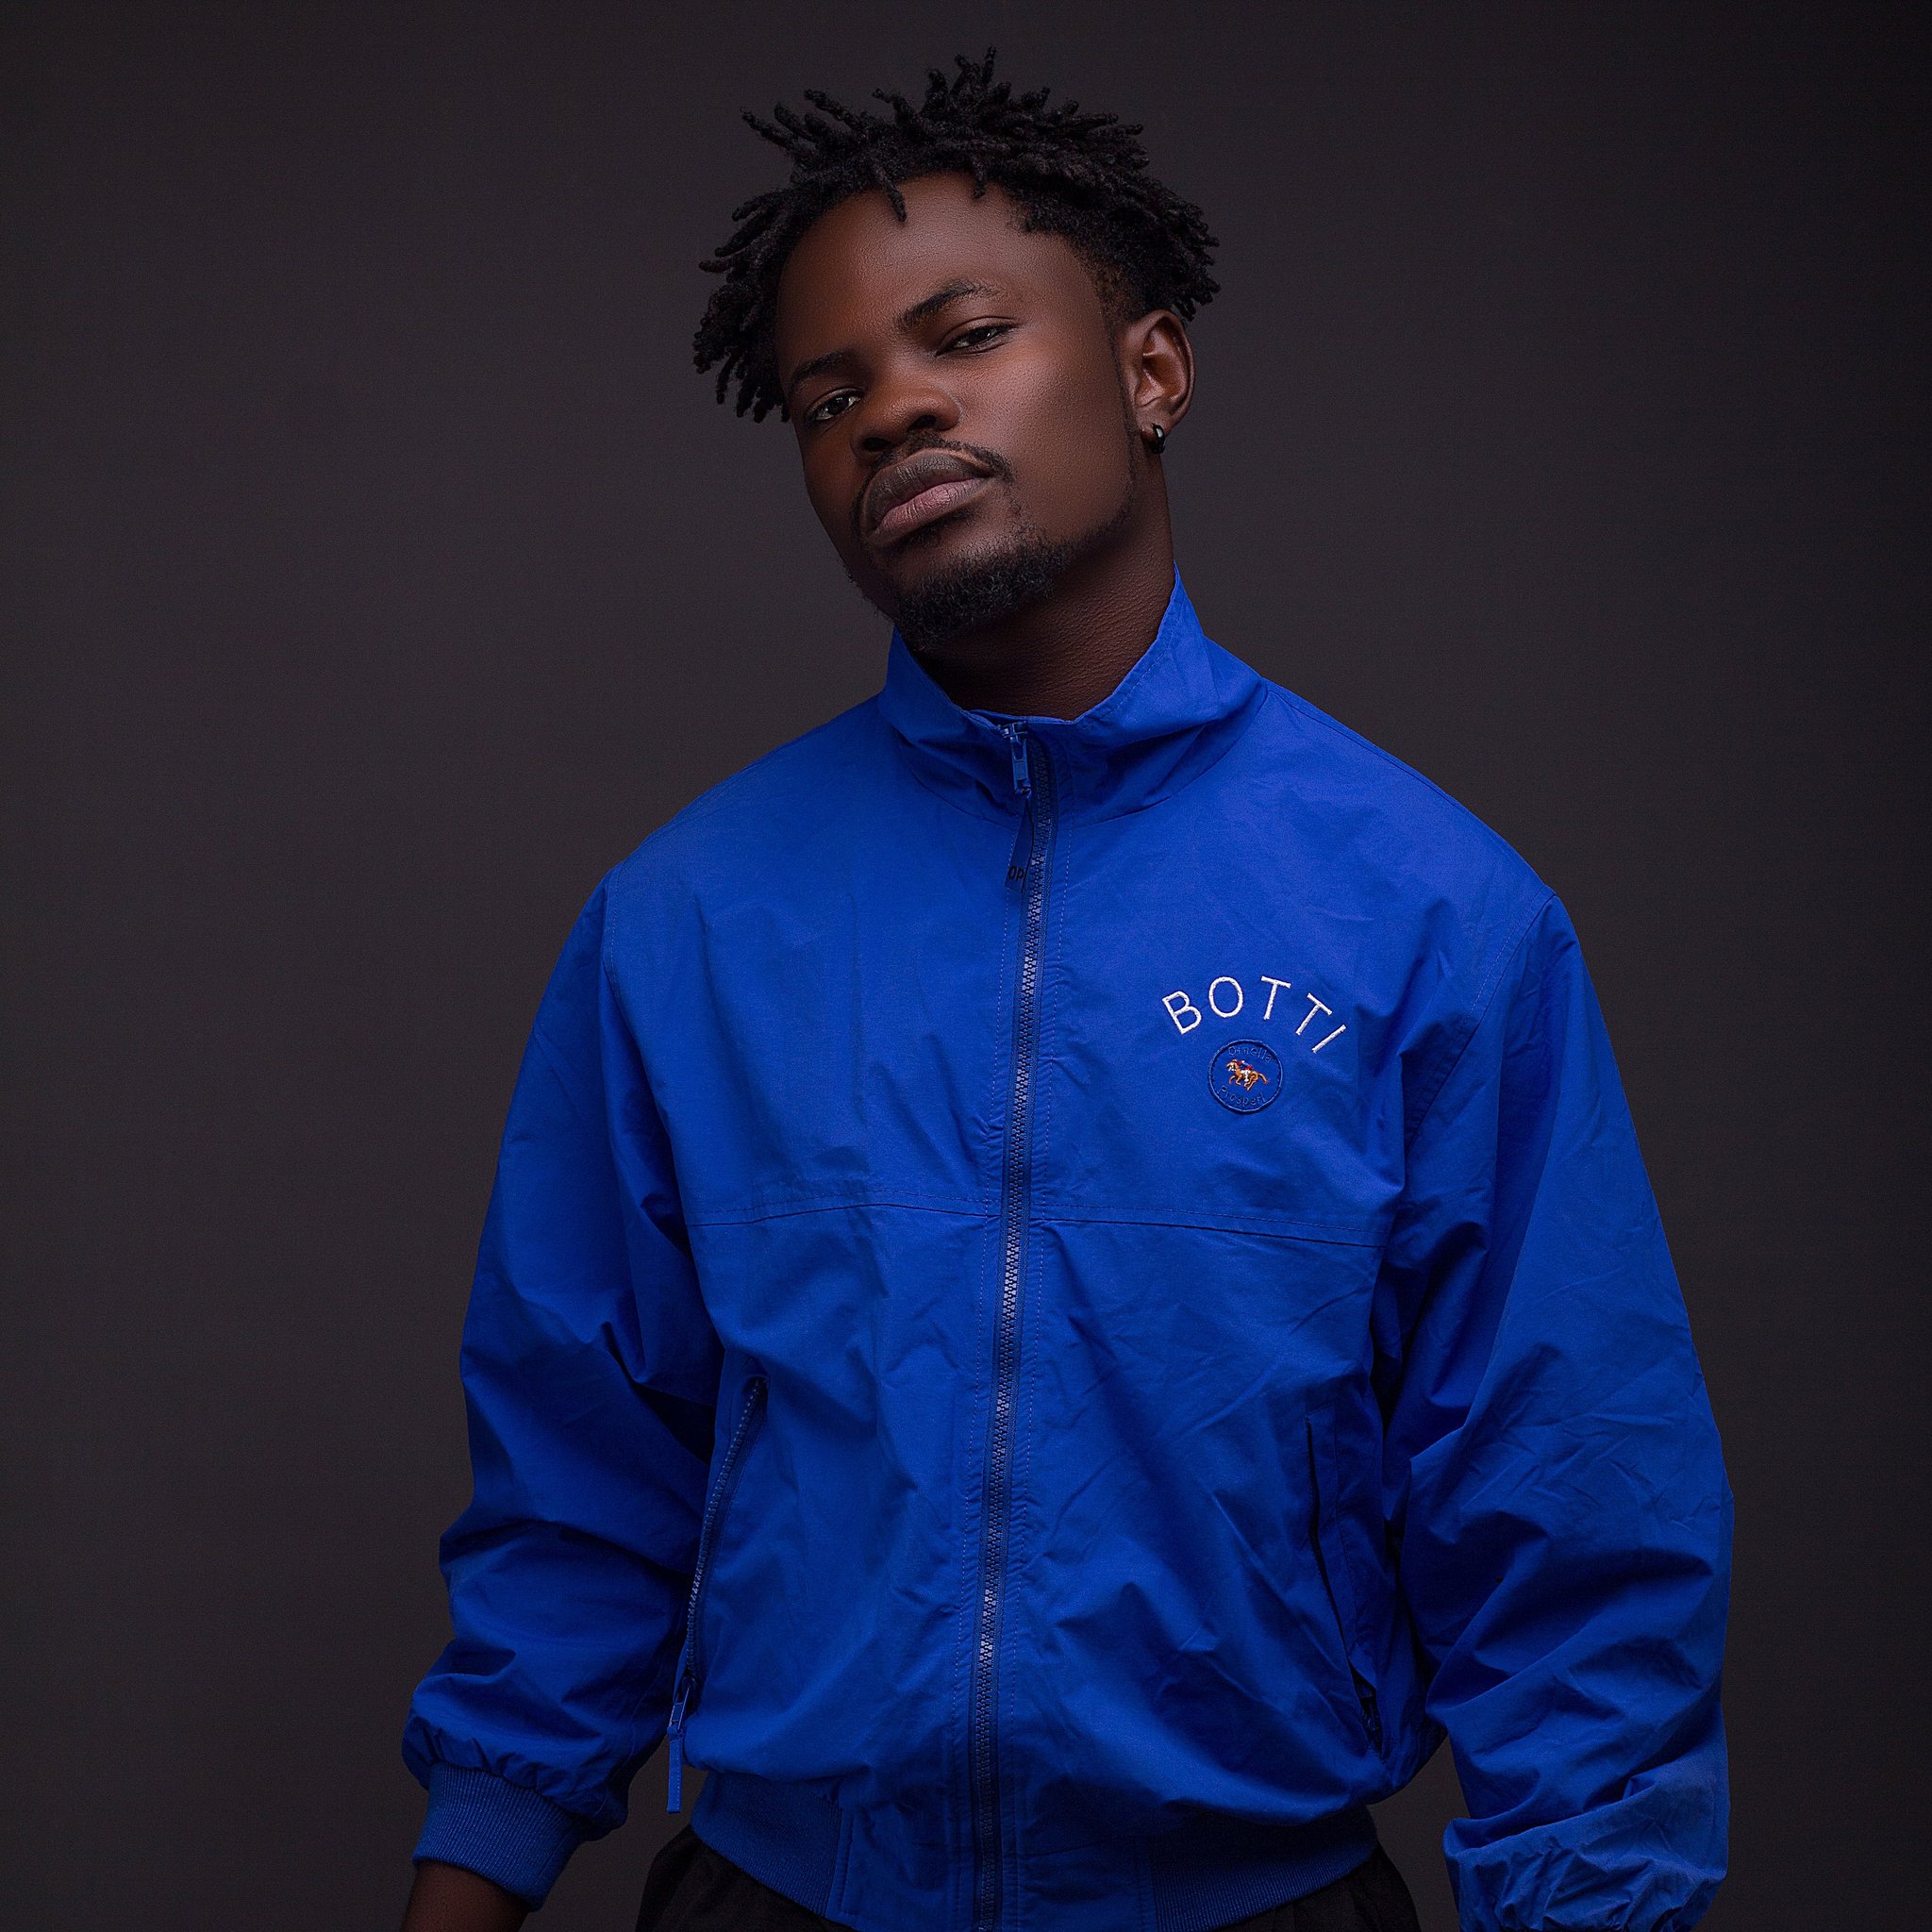 Fameye Drops The Track-list For His EP ‘Take Me Do’ - Ndwompafie.net